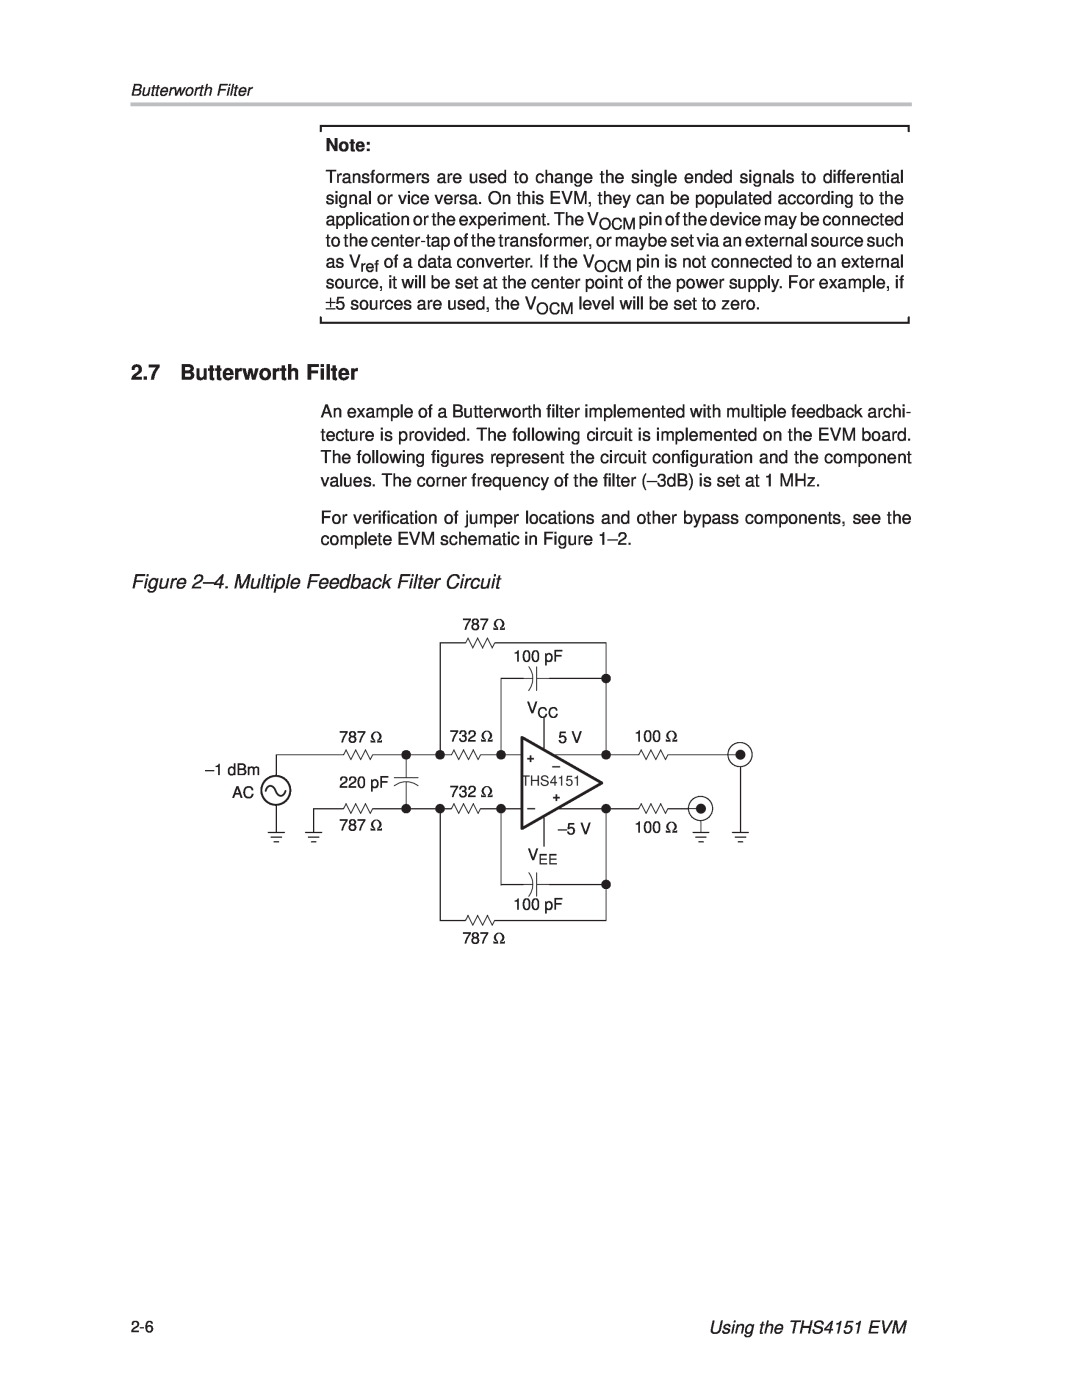 Texas Instruments manual Butterworth Filter, ±4. Multiple Feedback Filter Circuit, Using the THS4151 EVM 